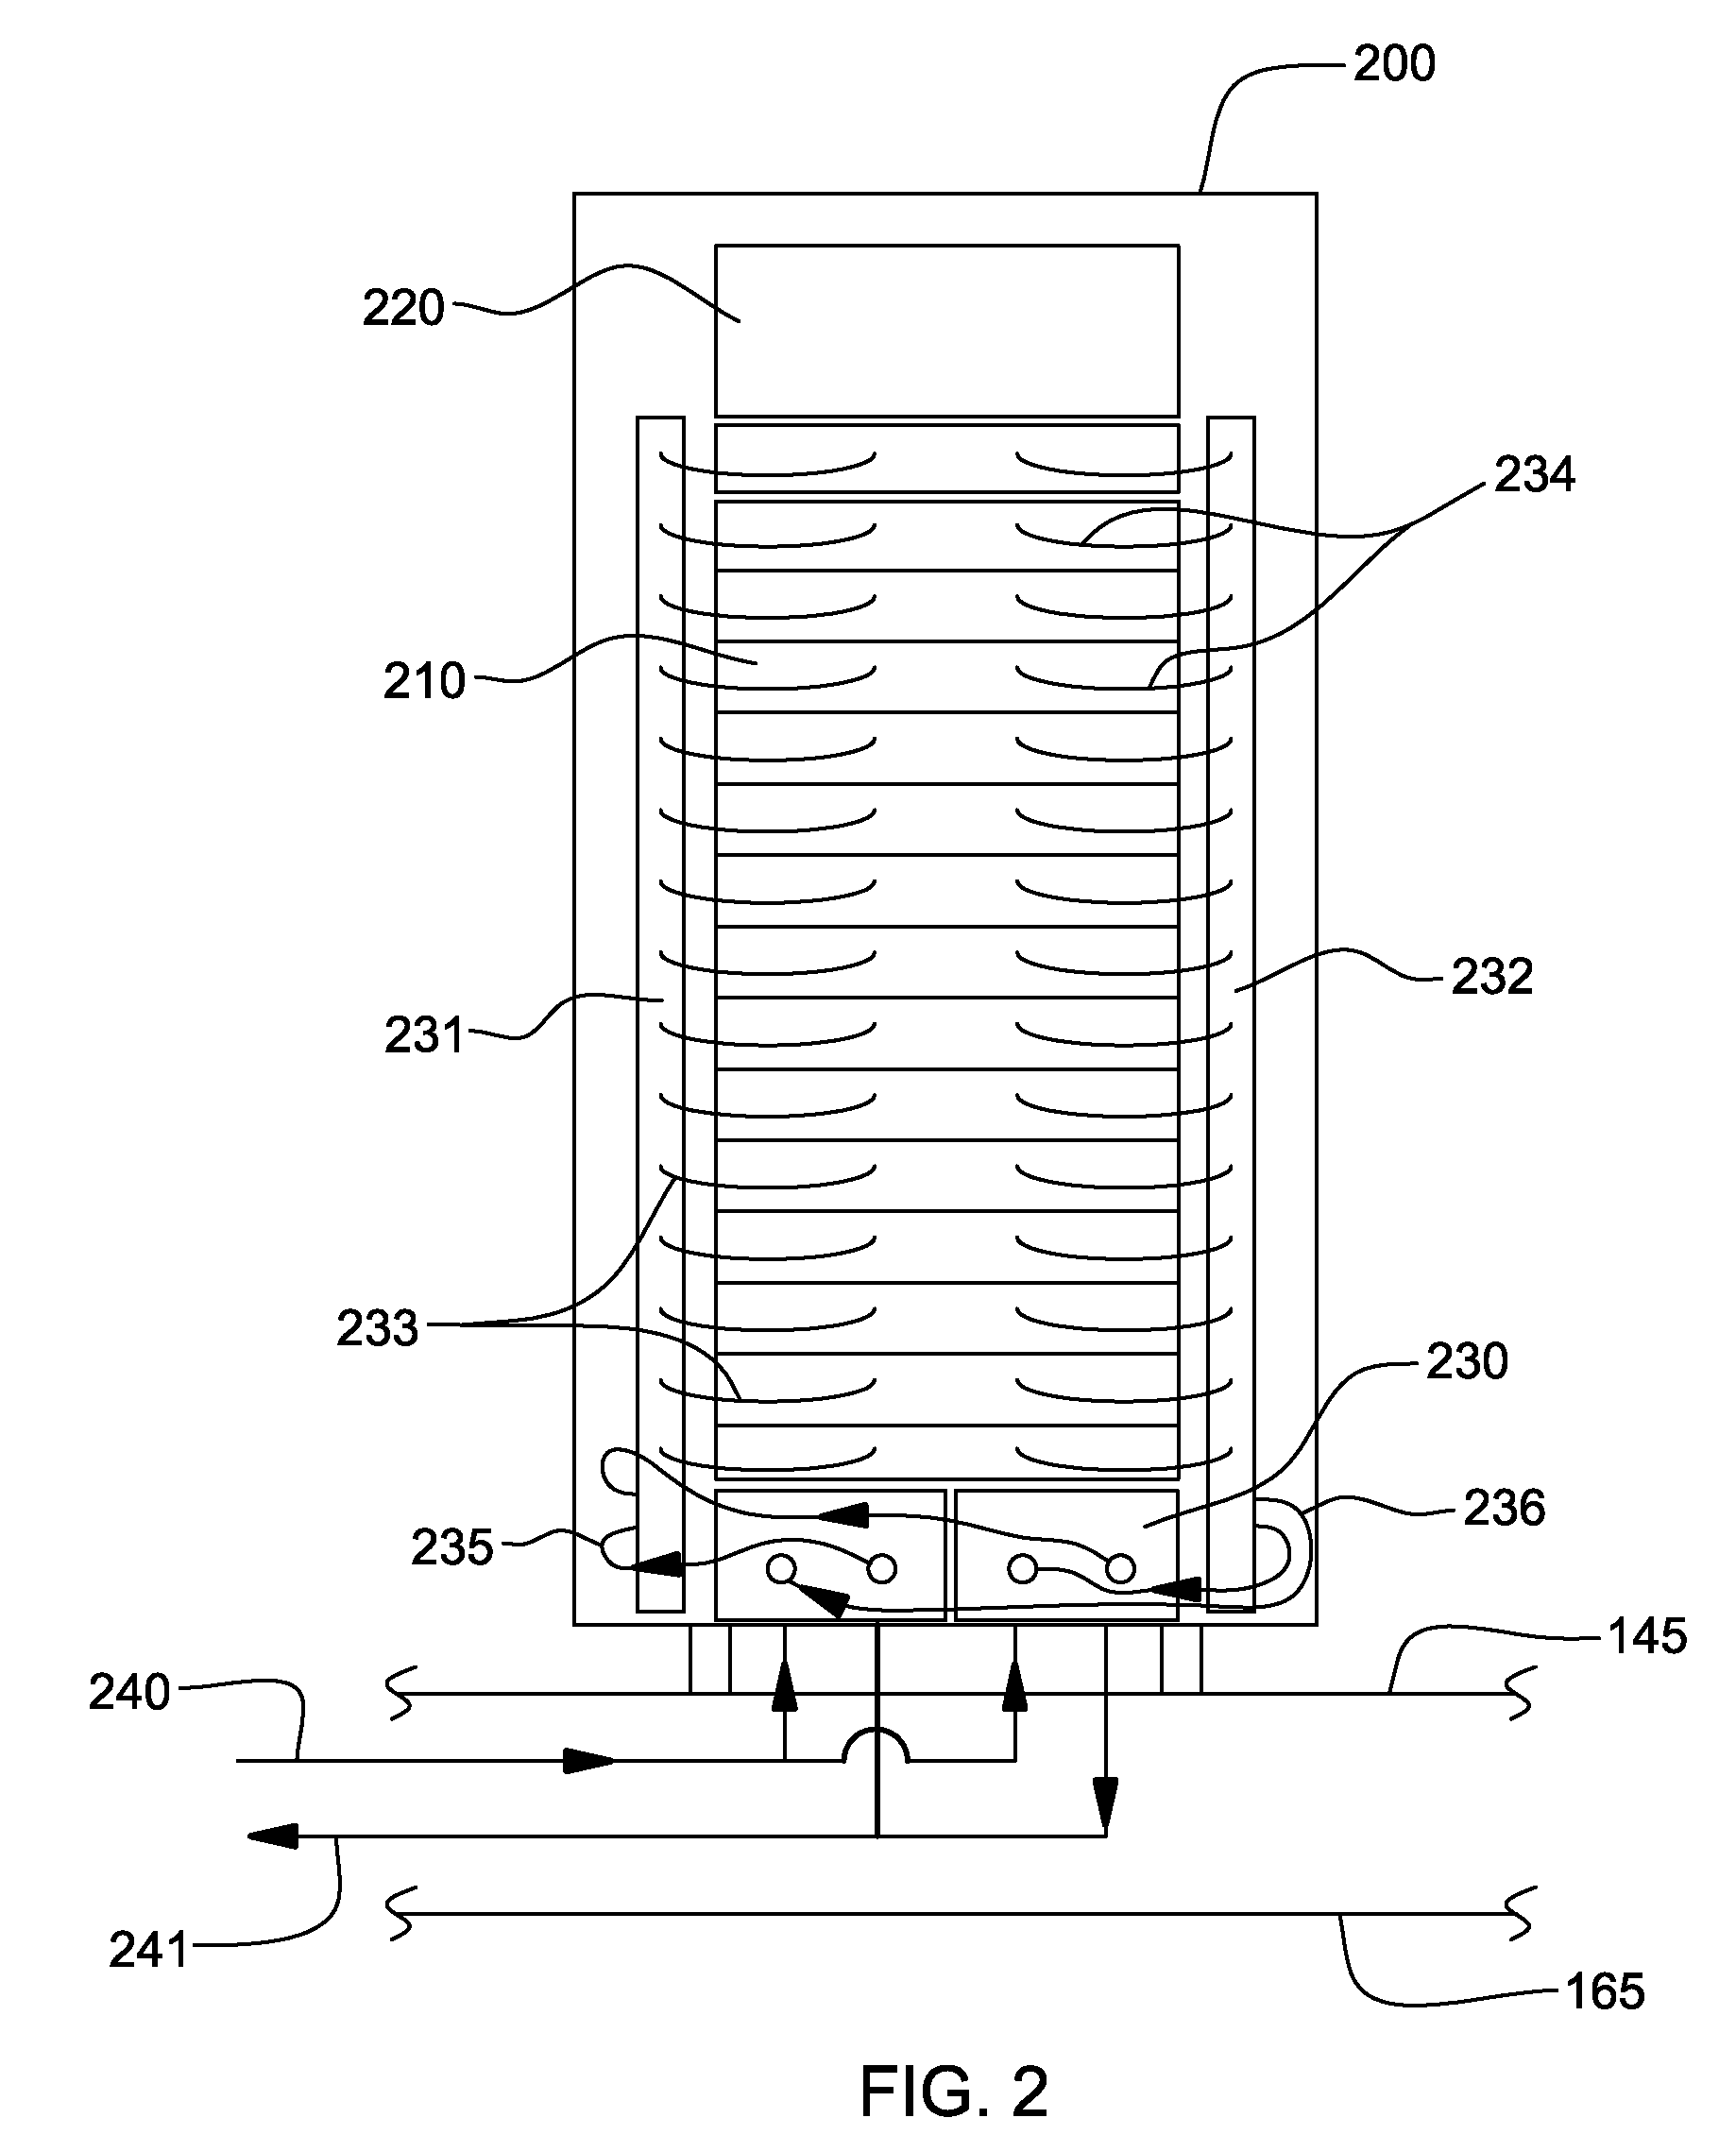 Immersion-cooled and conduction-cooled electronic system